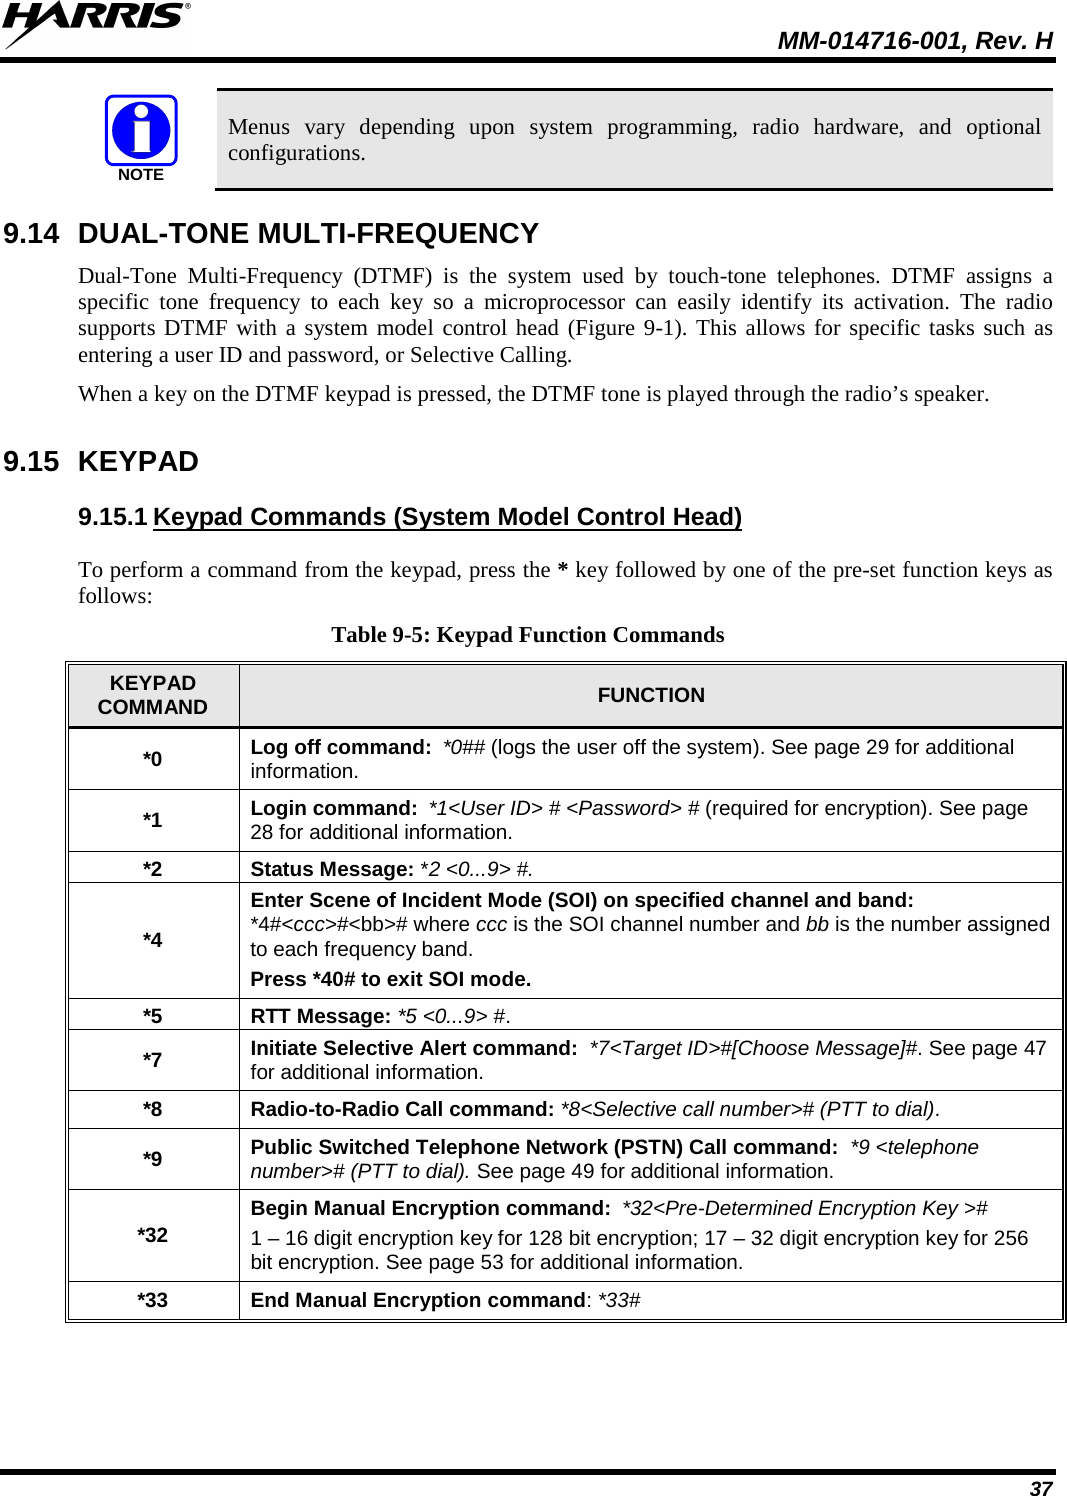  MM-014716-001, Rev. H 37 NOTE Menus vary depending upon system programming, radio hardware, and optional configurations.  9.14 DUAL-TONE MULTI-FREQUENCY Dual-Tone Multi-Frequency (DTMF) is the system used by touch-tone telephones. DTMF assigns a specific tone frequency to each key so a microprocessor can easily identify its activation. The radio supports DTMF with a system model control head (Figure 9-1). This allows for specific tasks such as entering a user ID and password, or Selective Calling. When a key on the DTMF keypad is pressed, the DTMF tone is played through the radio’s speaker. 9.15 KEYPAD 9.15.1 Keypad Commands (System Model Control Head) To perform a command from the keypad, press the * key followed by one of the pre-set function keys as follows: Table 9-5: Keypad Function Commands KEYPAD COMMAND FUNCTION *0 Log off command: *0## (logs the user off the system). See page 29 for additional information. *1 Login command: *1&lt;User ID&gt; # &lt;Password&gt; # (required for encryption). See page 28 for additional information. *2 Status Message: *2 &lt;0...9&gt; #. *4 Enter Scene of Incident Mode (SOI) on specified channel and band: *4#&lt;ccc&gt;#&lt;bb&gt;# where ccc is the SOI channel number and bb is the number assigned to each frequency band.  Press *40# to exit SOI mode. *5 RTT Message: *5 &lt;0...9&gt; #.  *7 Initiate Selective Alert command:  *7&lt;Target ID&gt;#[Choose Message]#. See page 47 for additional information. *8 Radio-to-Radio Call command: *8&lt;Selective call number&gt;# (PTT to dial).  *9 Public Switched Telephone Network (PSTN) Call command:  *9 &lt;telephone number&gt;# (PTT to dial). See page 49 for additional information. *32 Begin Manual Encryption command: *32&lt;Pre-Determined Encryption Key &gt;#  1 – 16 digit encryption key for 128 bit encryption; 17 – 32 digit encryption key for 256 bit encryption. See page 53 for additional information. *33 End Manual Encryption command: *33# 